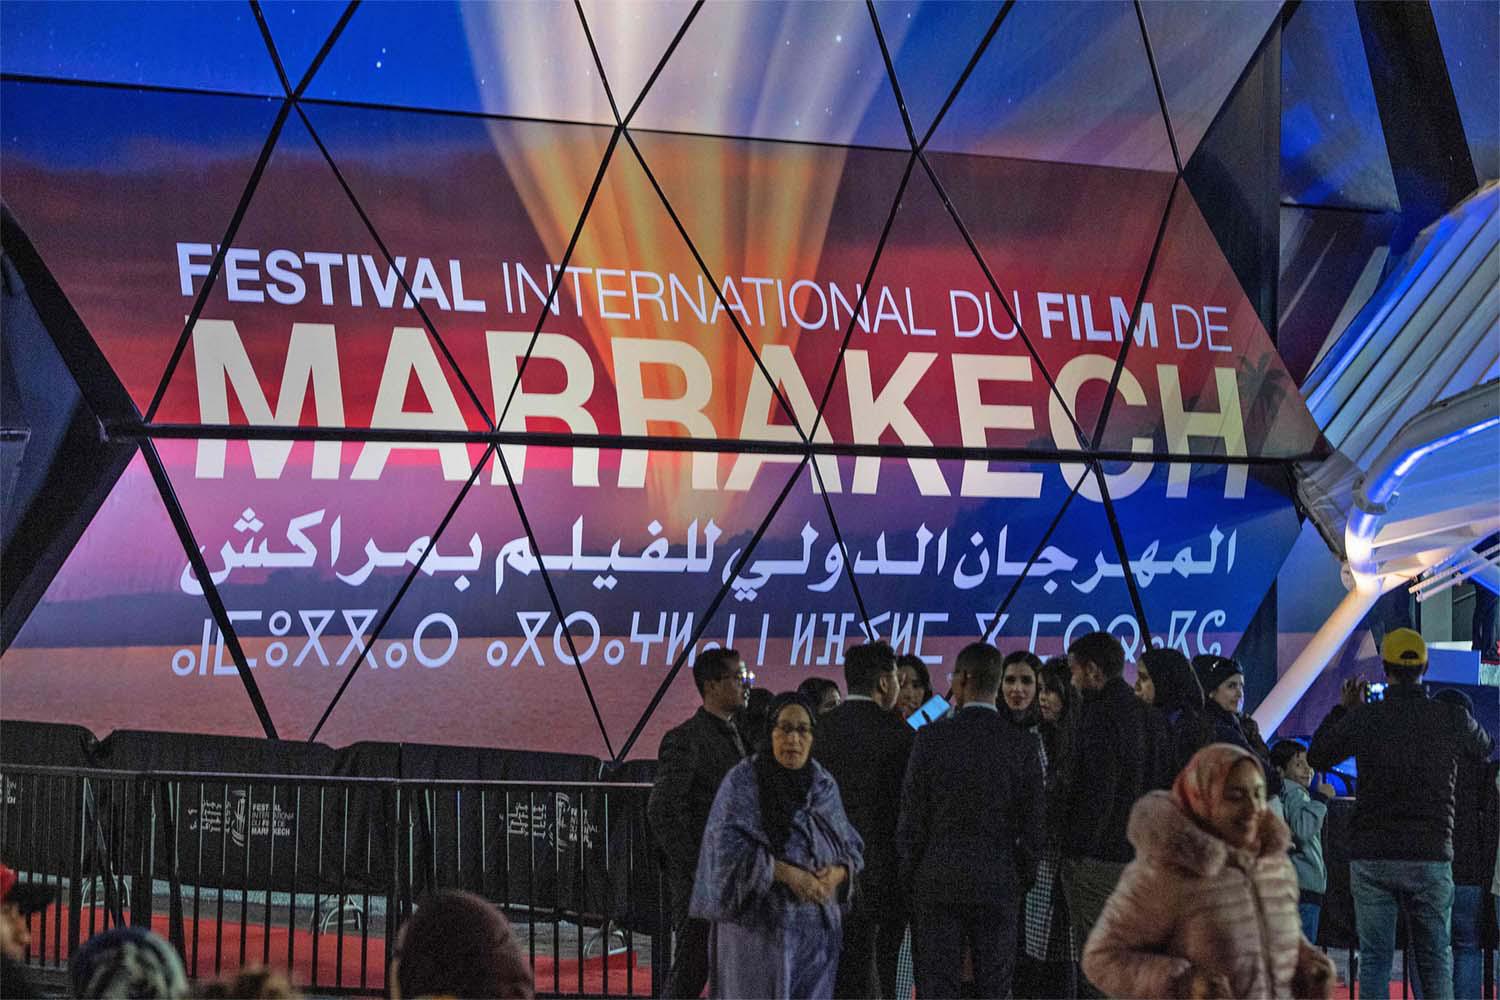 Since its launch in 2001, the Marrakech International Film Festival has paid tribute annually to the greatest names of Moroccan and international cinema